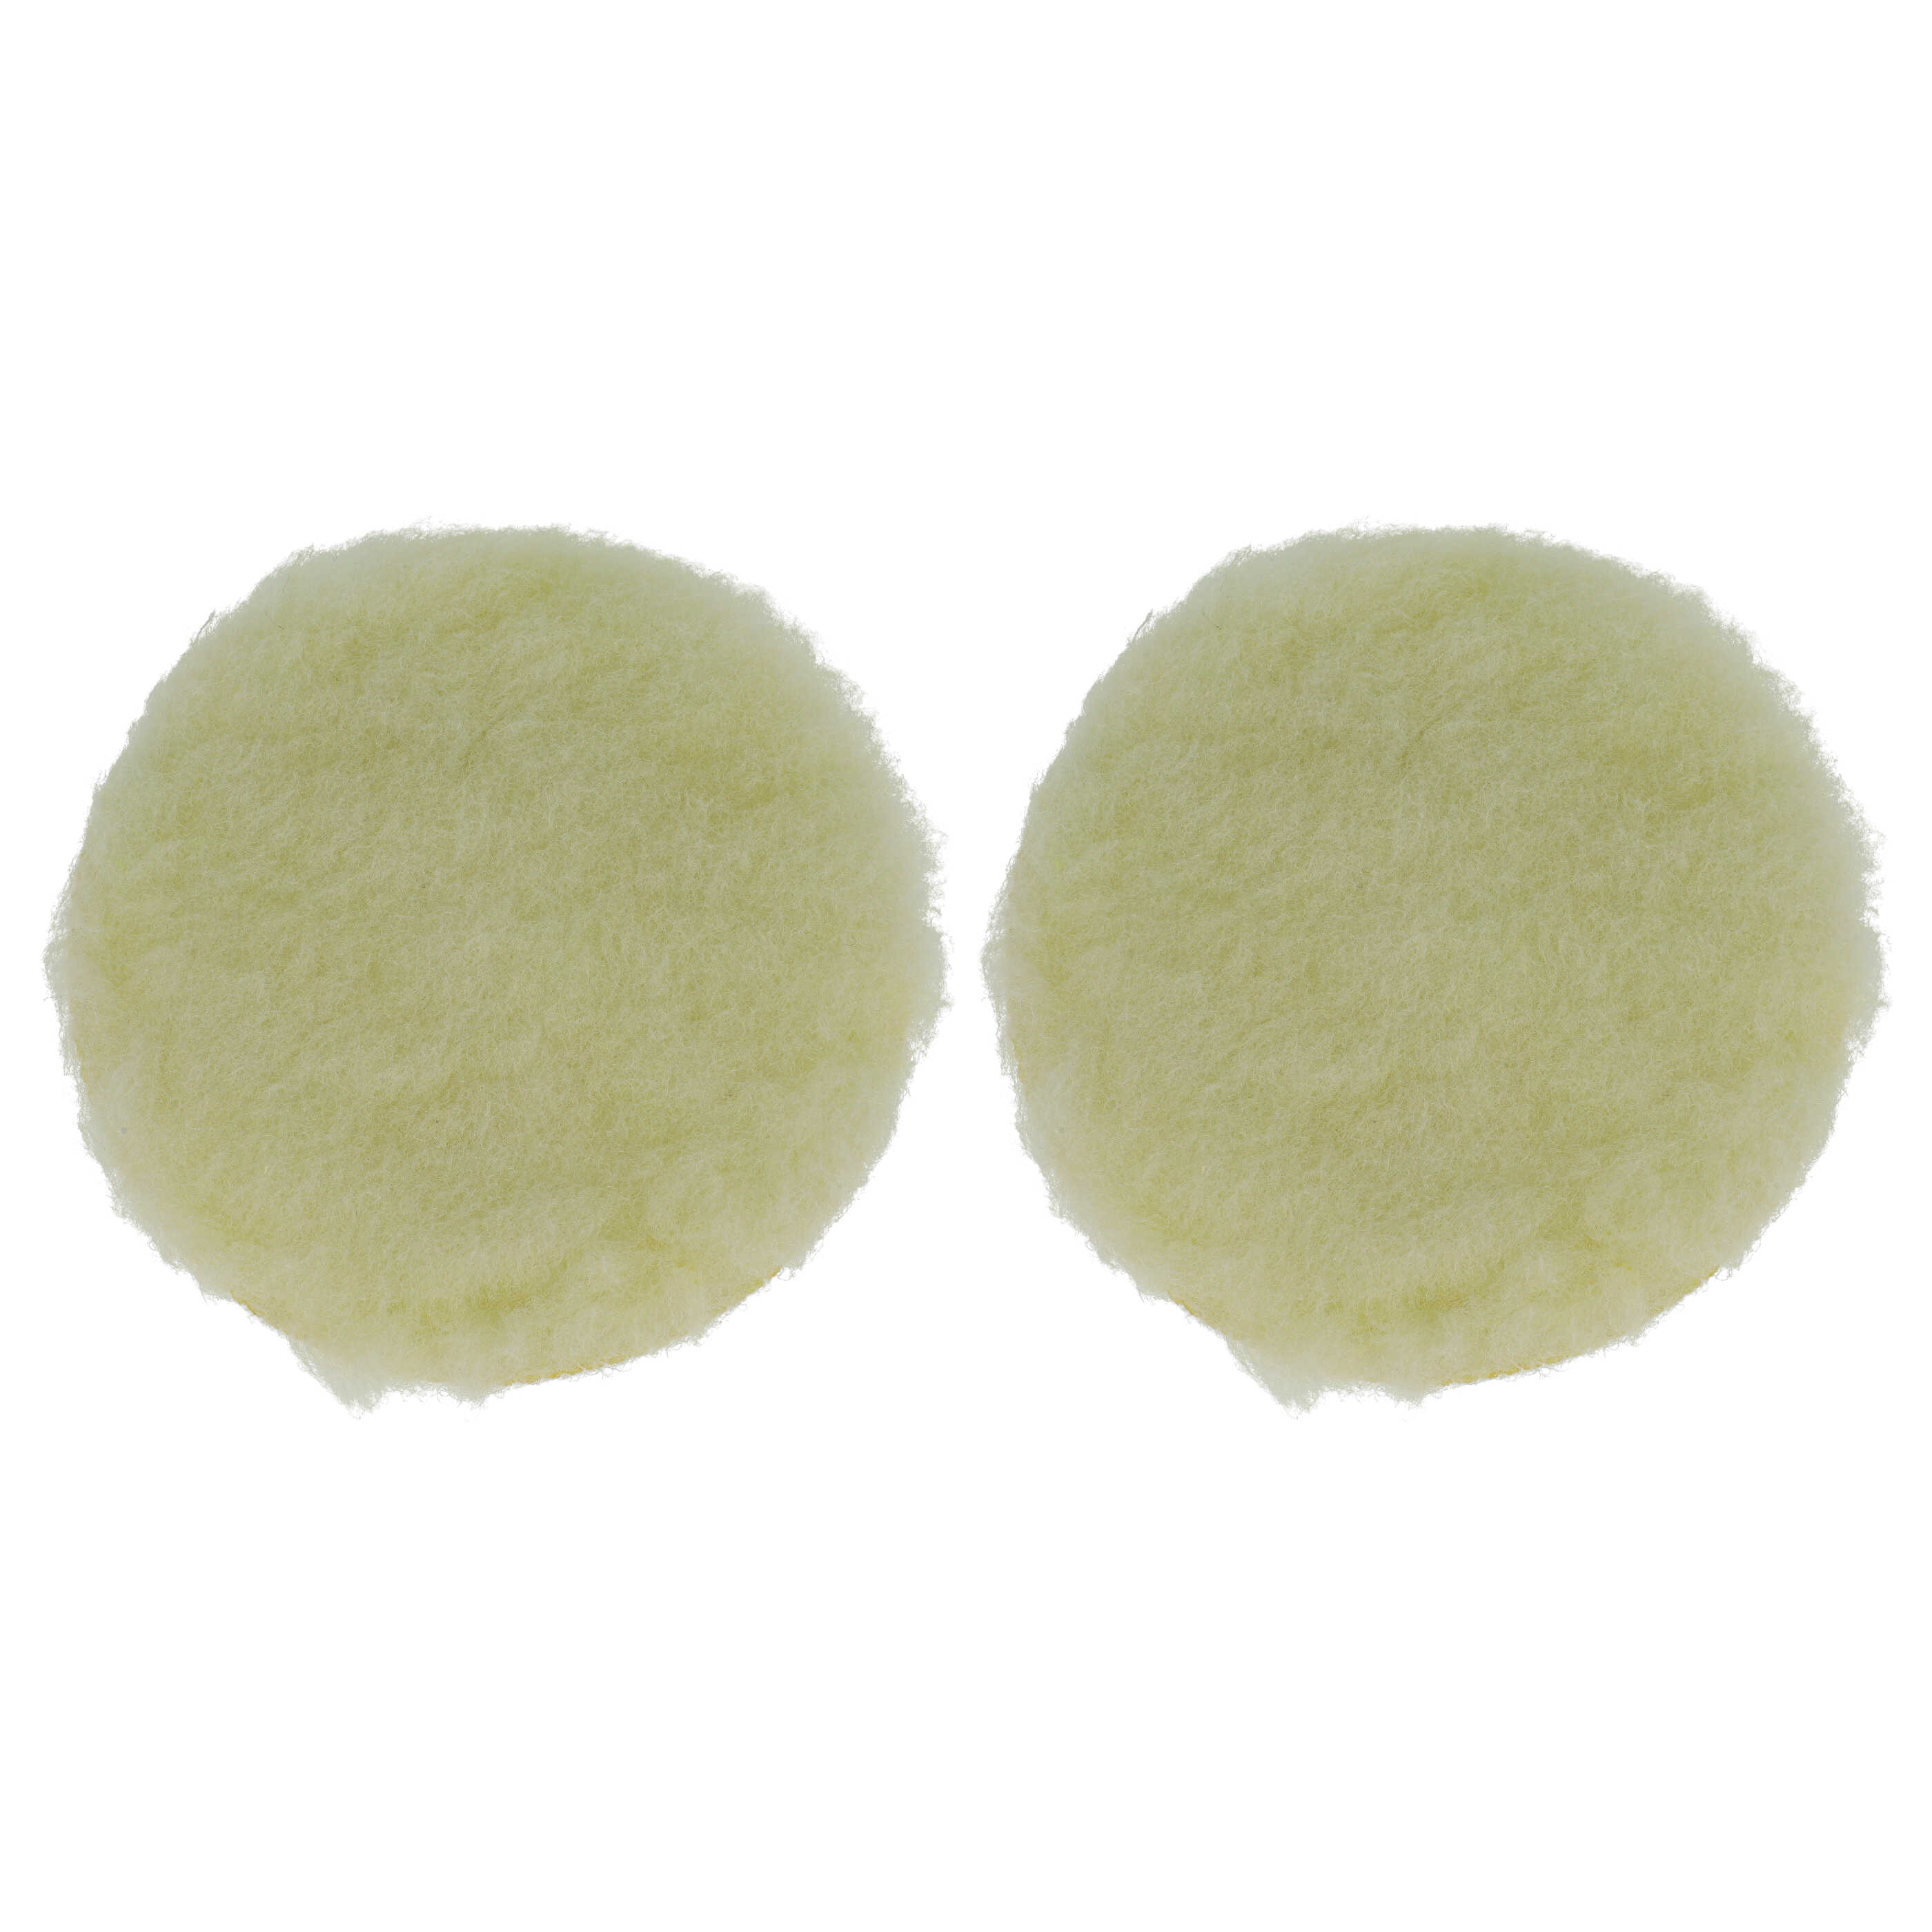 2x Polishing Pad as Replacement for Bosch 2609256049, 3165140386524 - 12.5 cm Diameter, 16 g